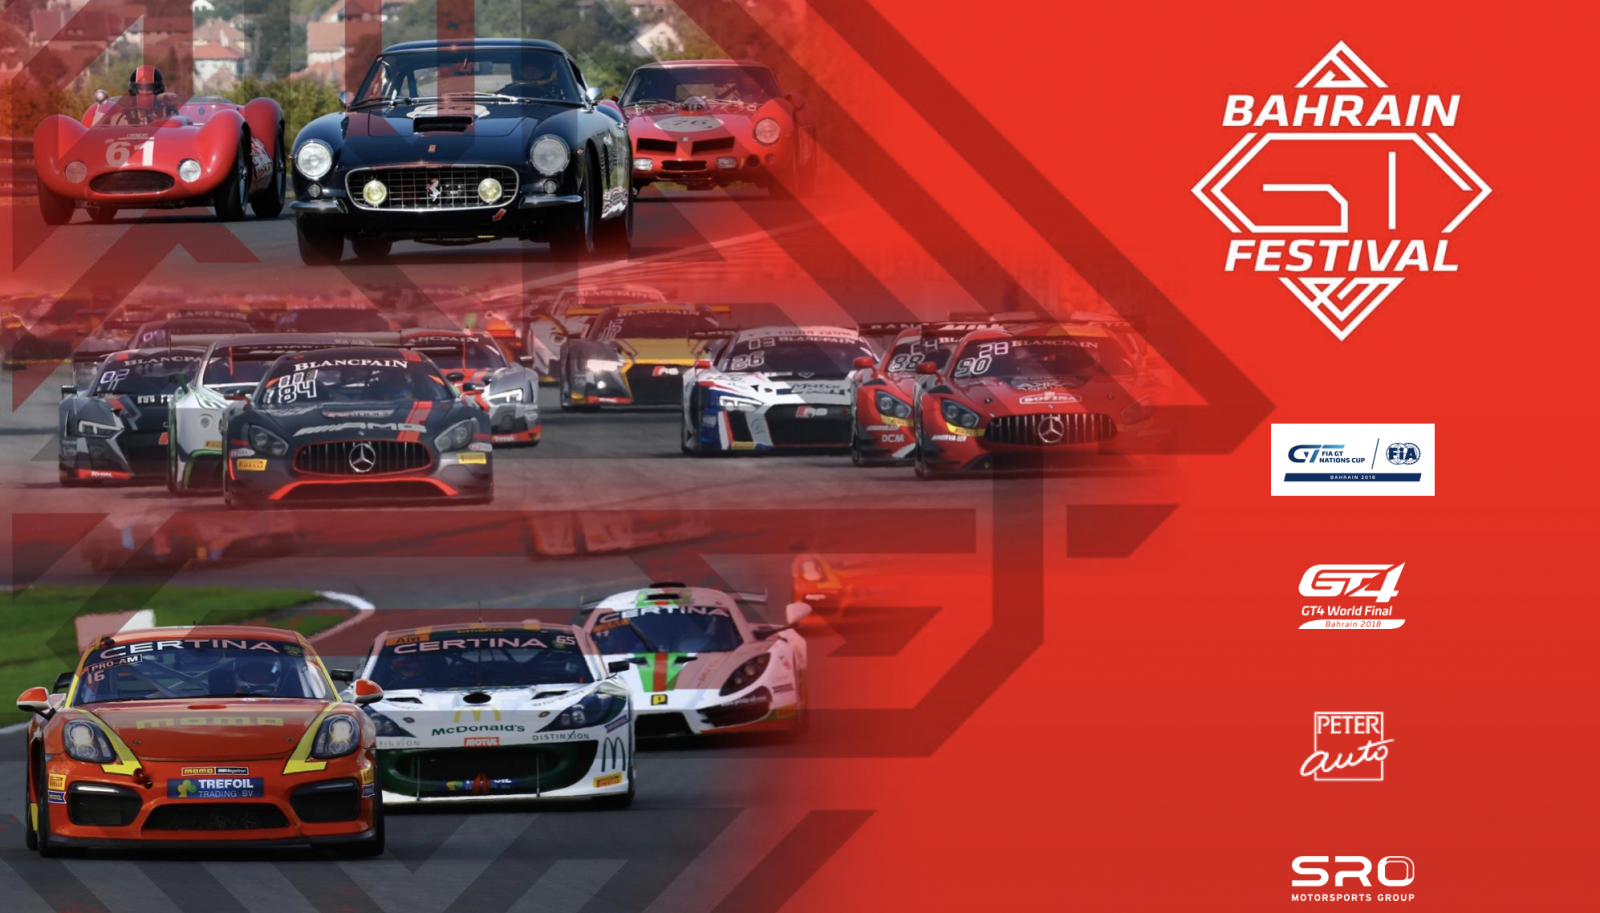  SRO Motorsports Group and Bahrain International Circuit reveal new GT Festival for 2018